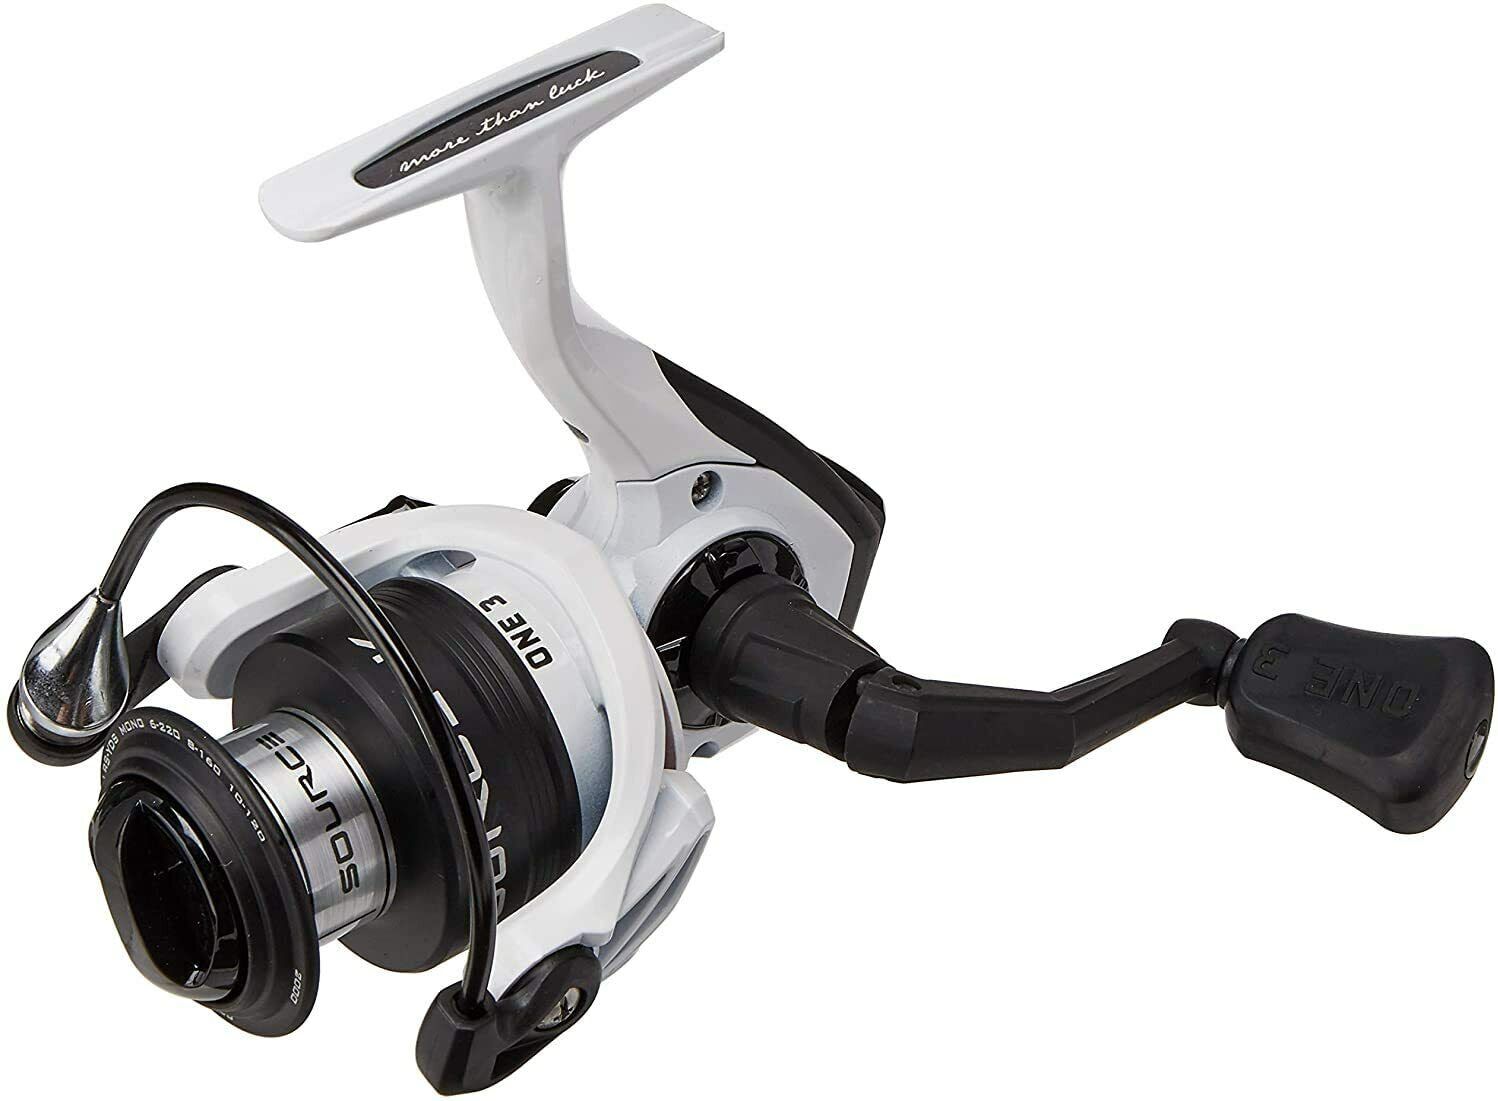 https://www.suesangling.com/wp-content/uploads/imported/5/13-Fishing-NEW-Source-K-2000-Spinning-Lure-Fishing-Reel-224952894595.jpg